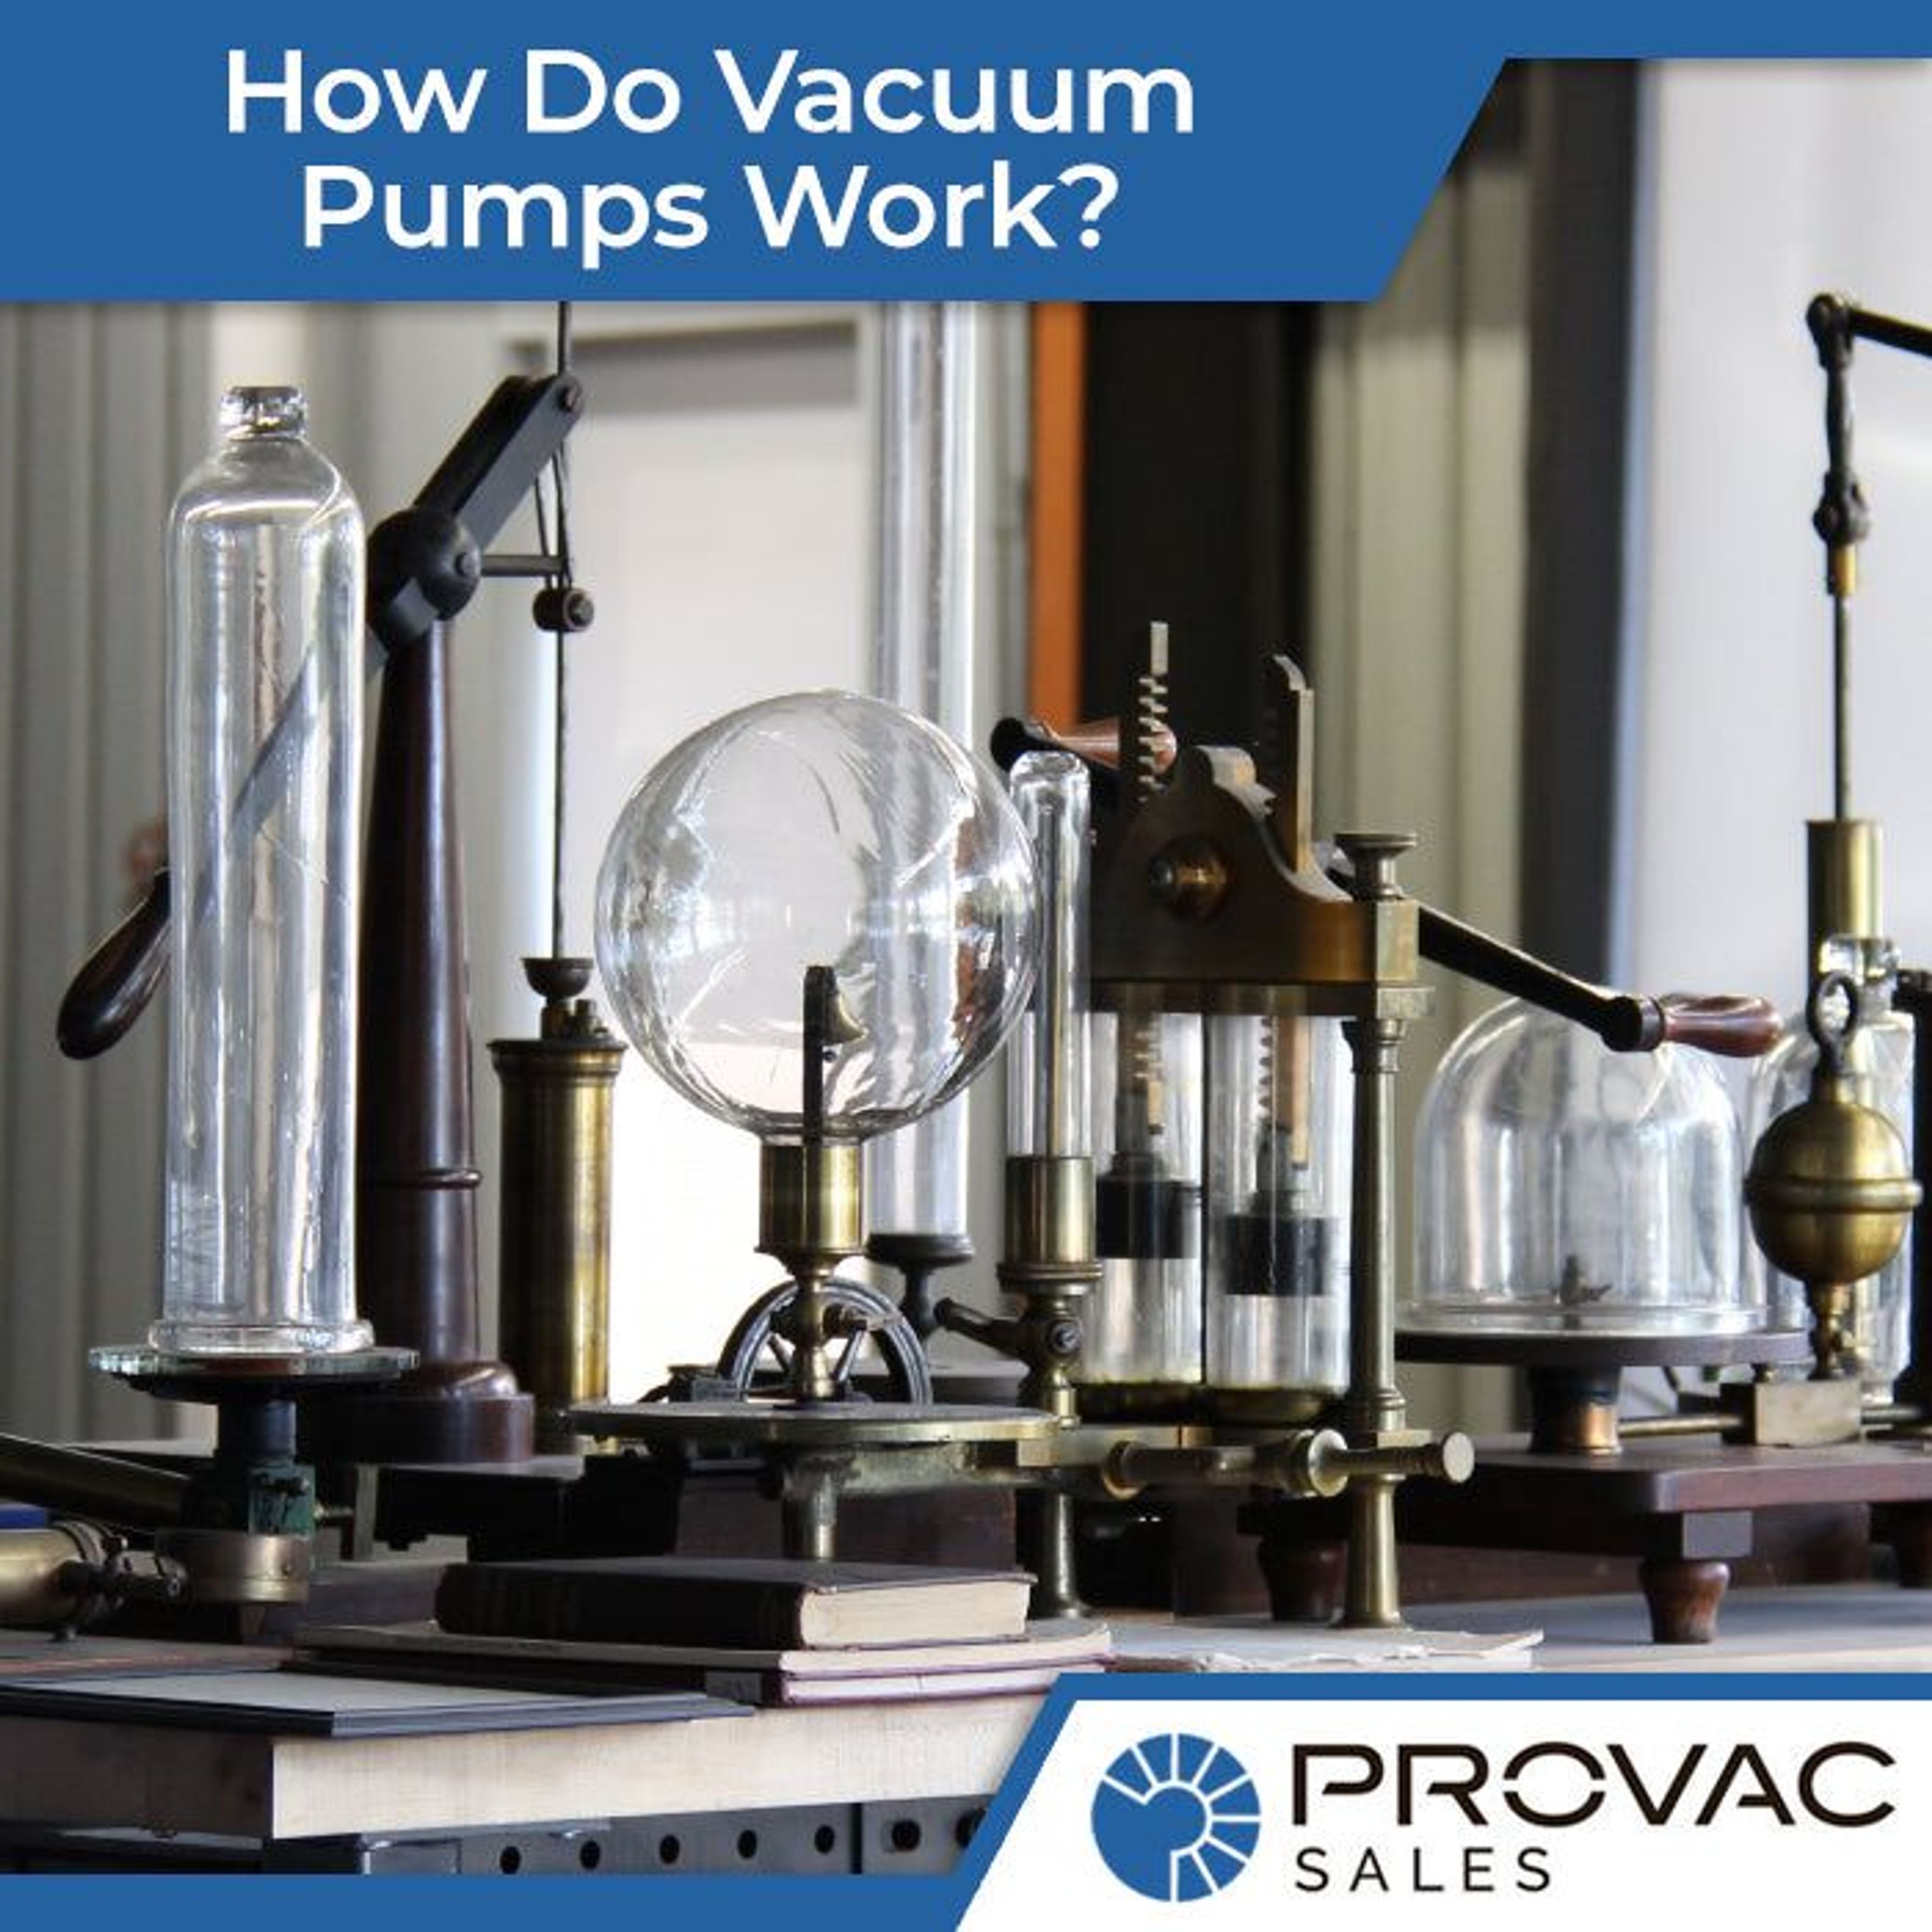 How Do Vacuum Pumps Work? Background